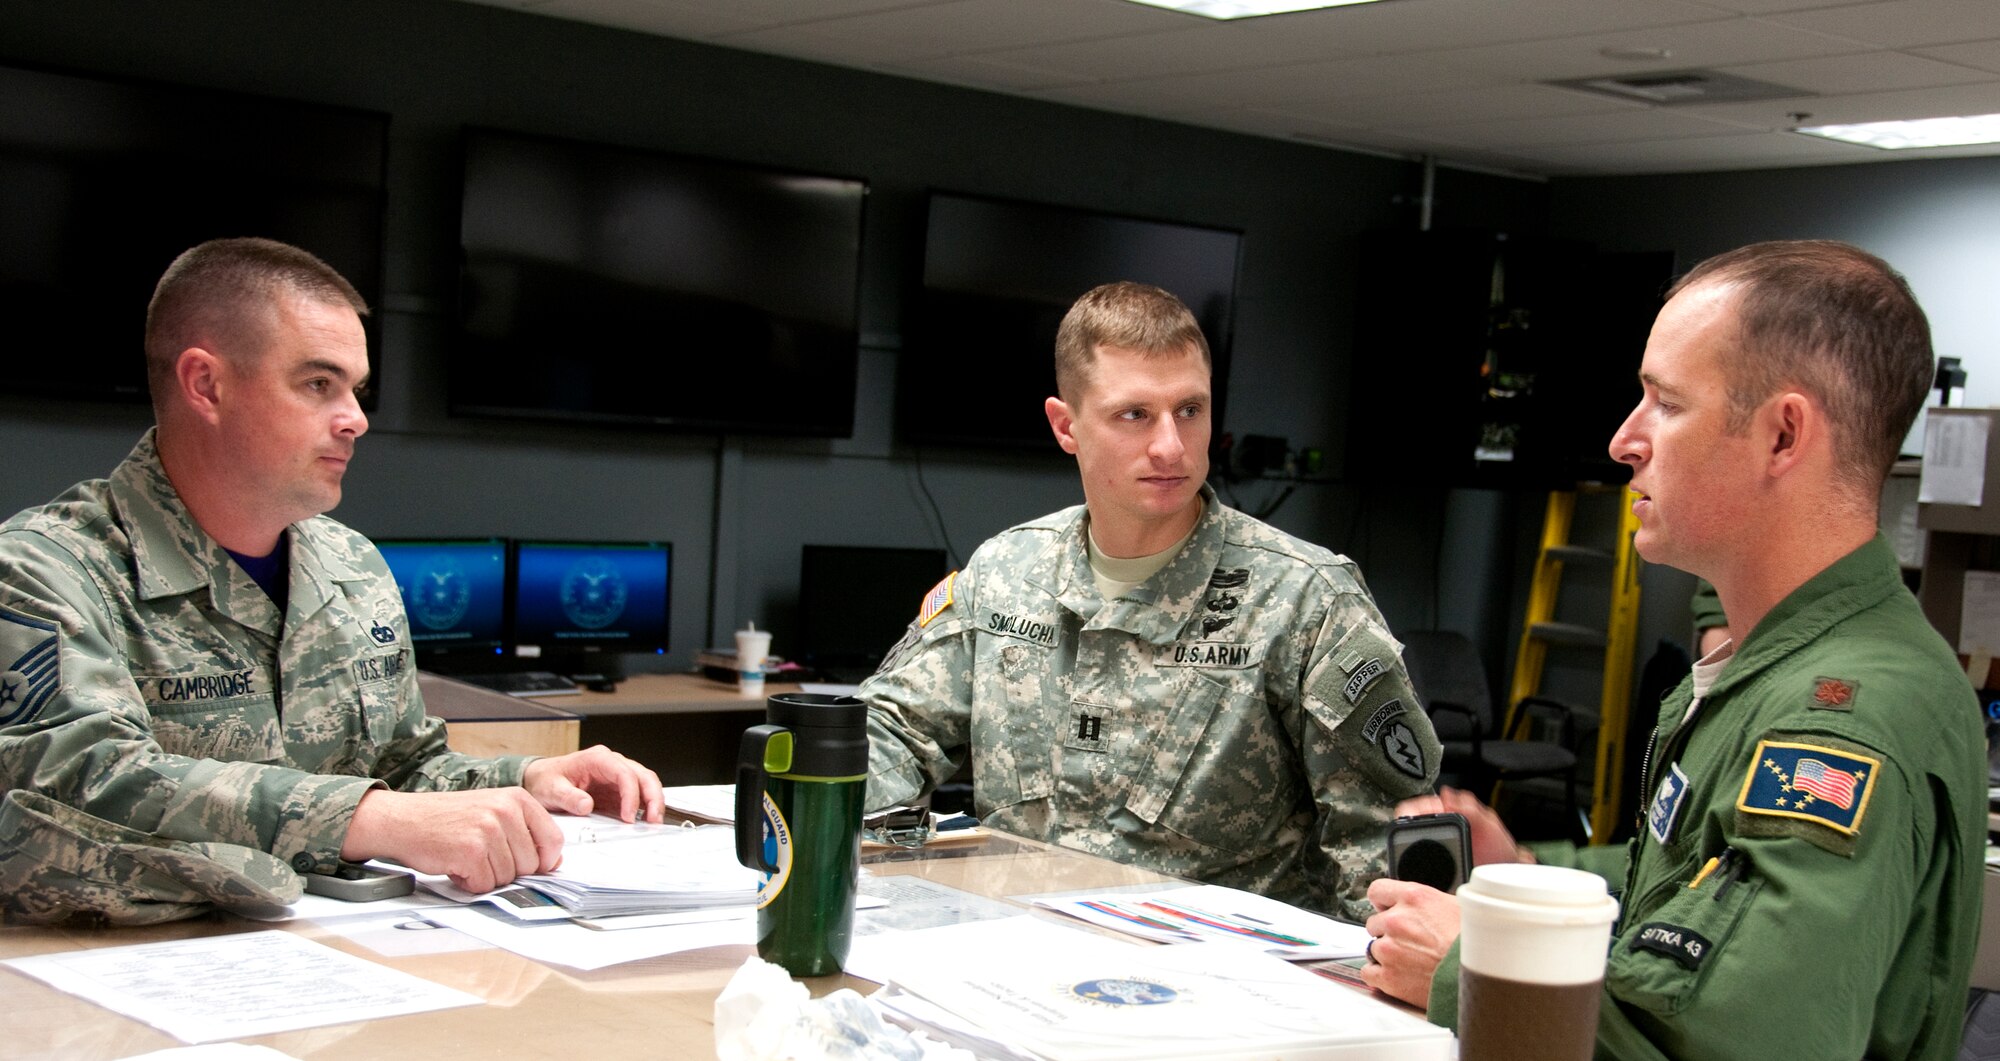 Members from the 773rd Logistics Readiness Group; 4th Brigade Combat Team (Airborne), 25th Infantry Division; and the 176th Operations Group coordinate mission planning on Joint Base Elmendorf-Richardson, Alaska, June 6, 2014. Alaska guardsmen and active duty soldiers and airmen combined efforts during a six-day Joint Forcible Entry Exercise. (U.S. Air National Guard photo by Staff Sgt. N. Alicia Halla. Released)